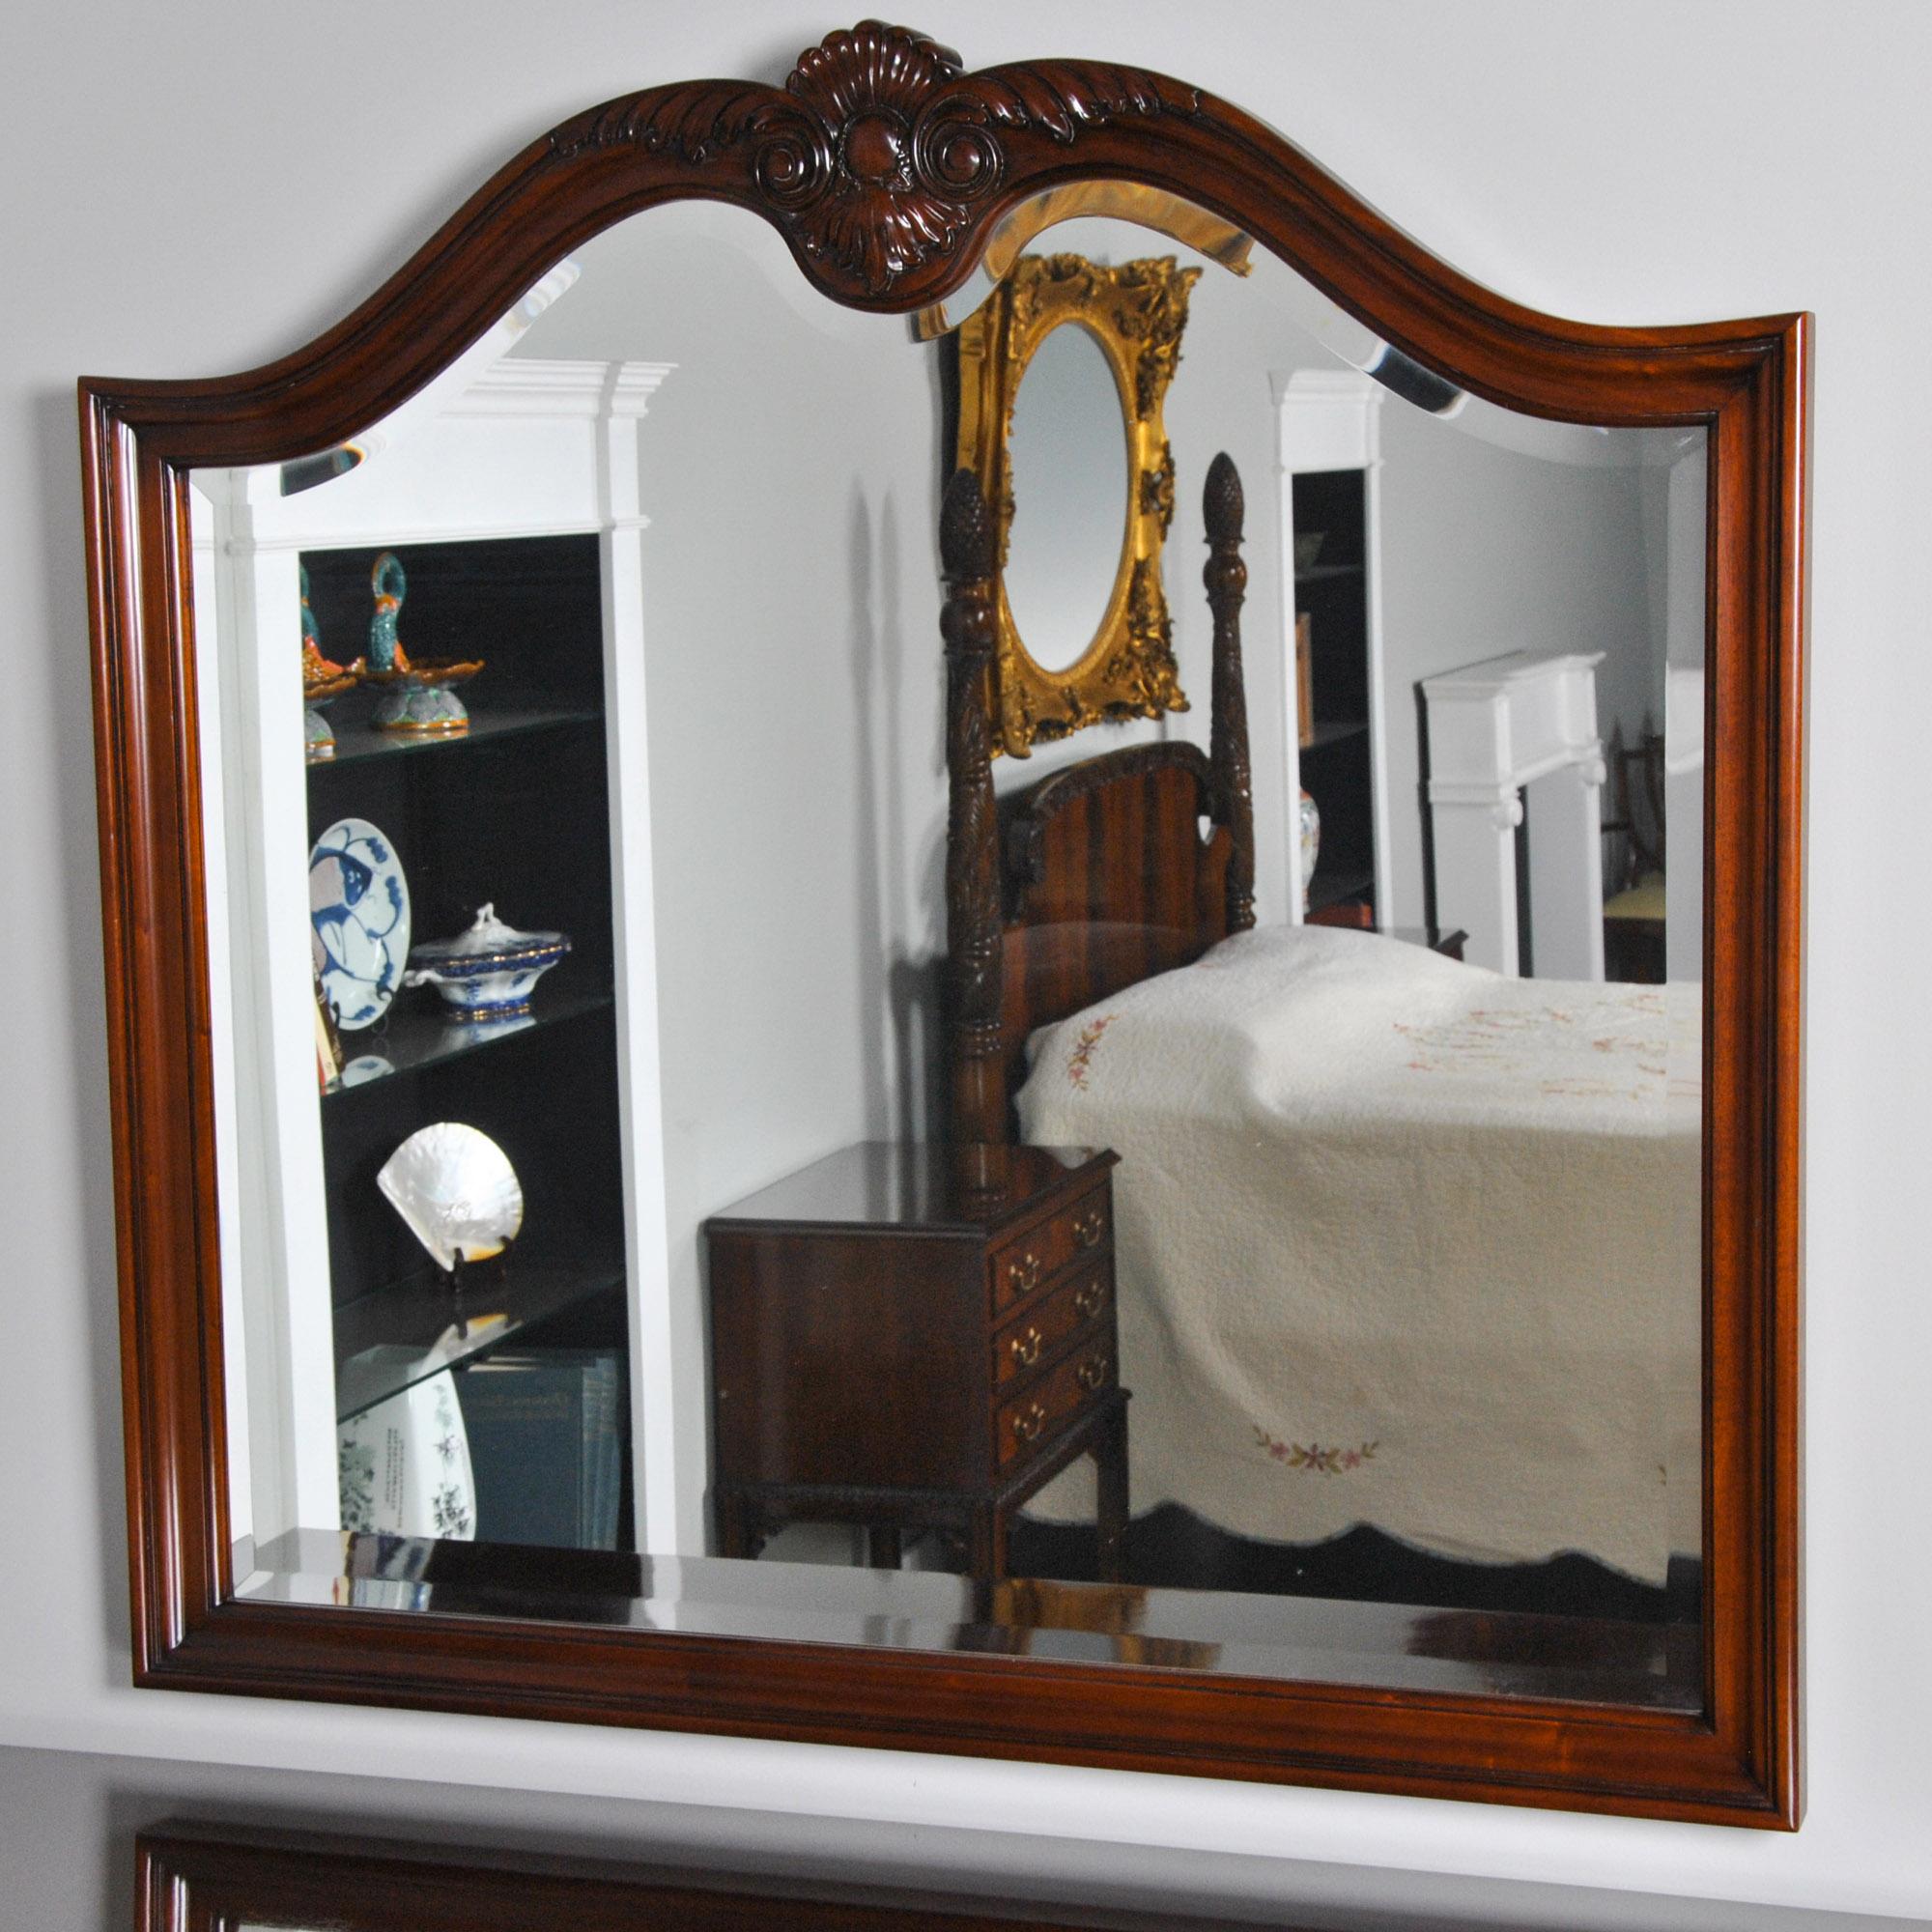 The Large Mahogany Mirror features a solid mahogany frame with a crest of hand carving. This helps discern the mirror from its' mass produced counter parts found elsewhere. Thick, great quality bevelled glass is used inside the frame and the Large